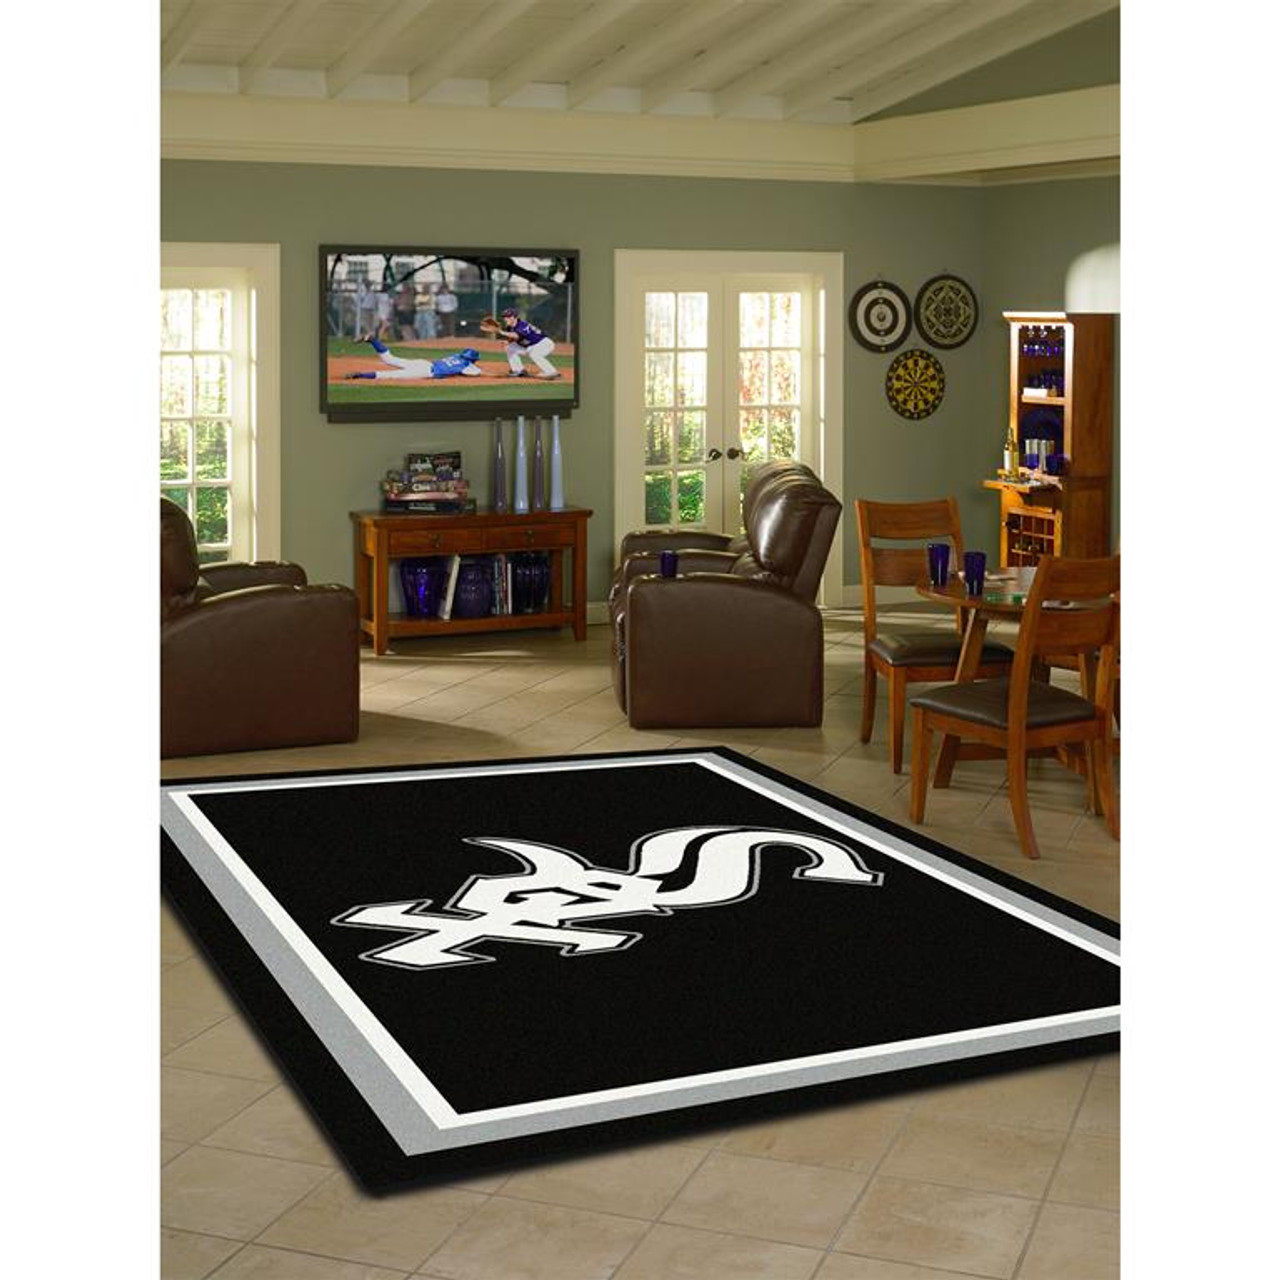 Chicago White Sox Starter Mat Accent Rug - 19in. x 30in. - White Sox  Secondary Club Lettering - Black - Starter Mat - Uniform, 32476